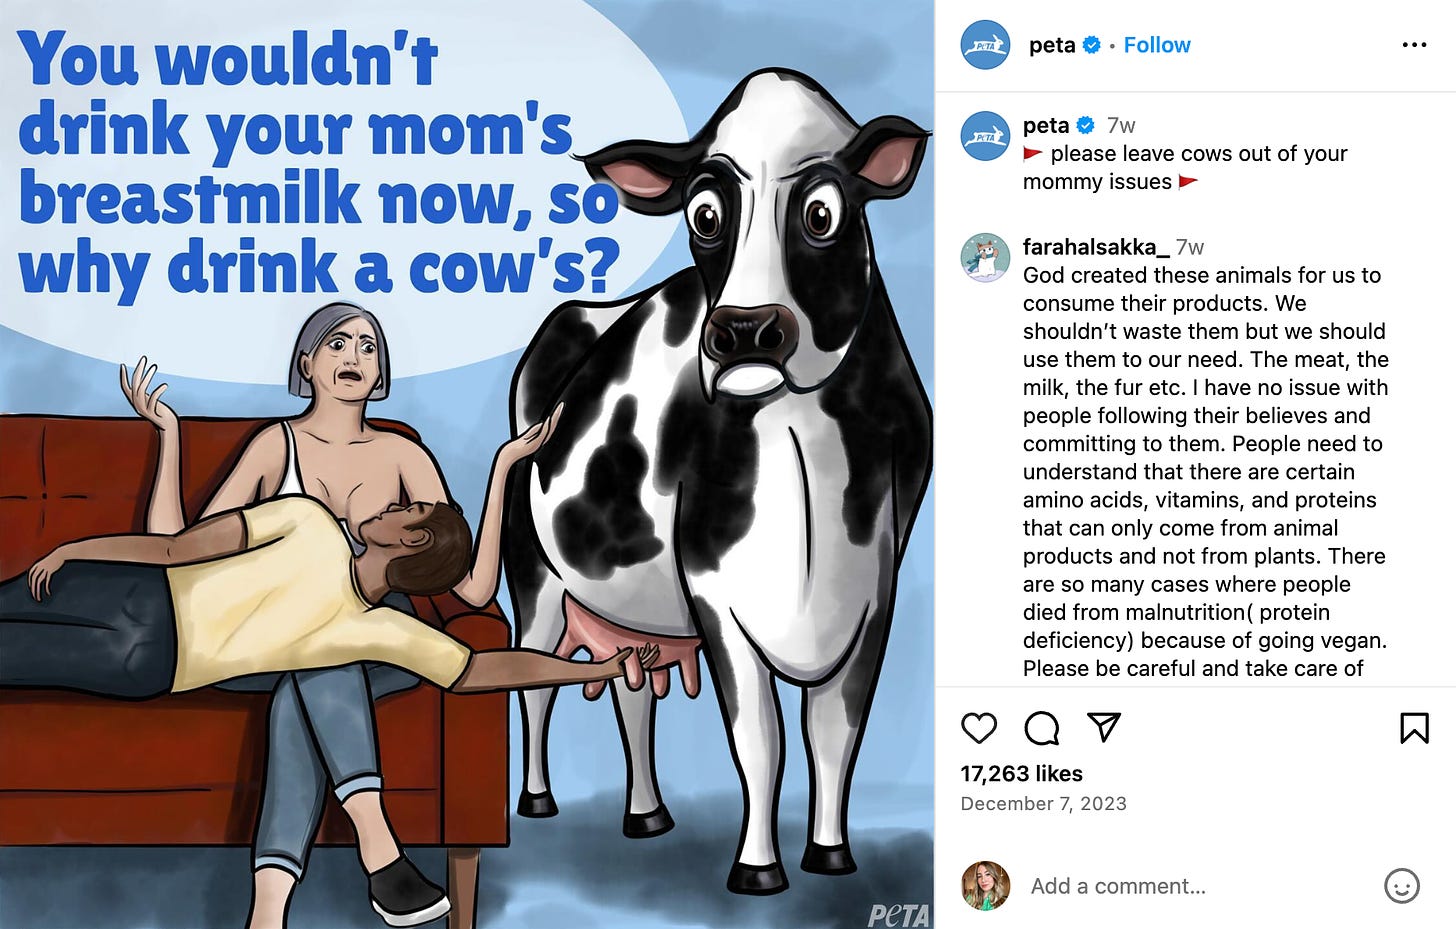 a cartoon that says “You wouldn’t drink your mom’s breastmilk now, so why drink a cow’s?” with an image of a man sucking an older woman’s breast